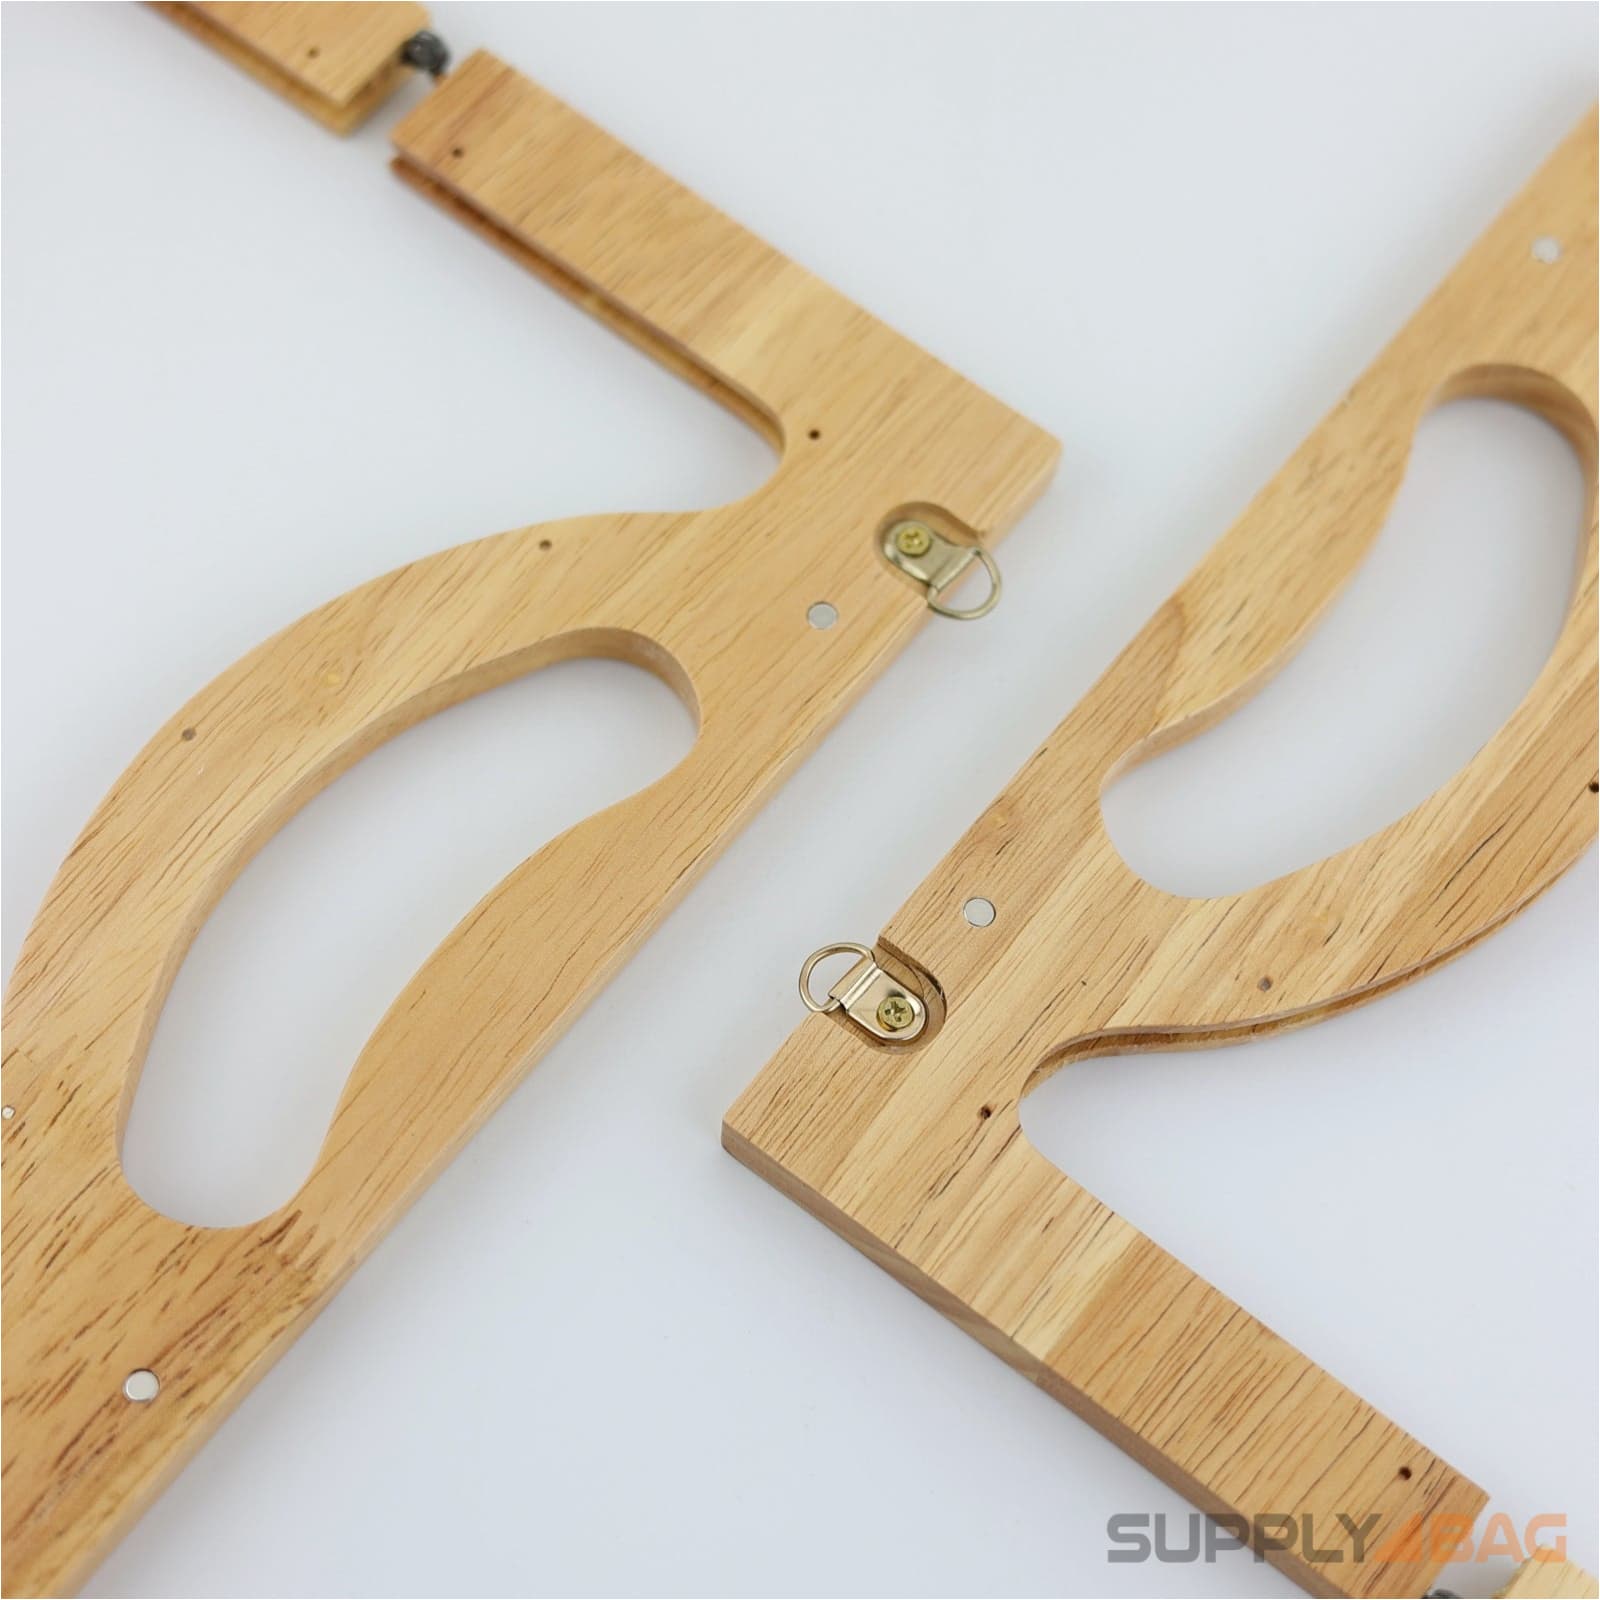 10 x 4 5/8 inch - wooden handbag frame with chain loops (finger joints